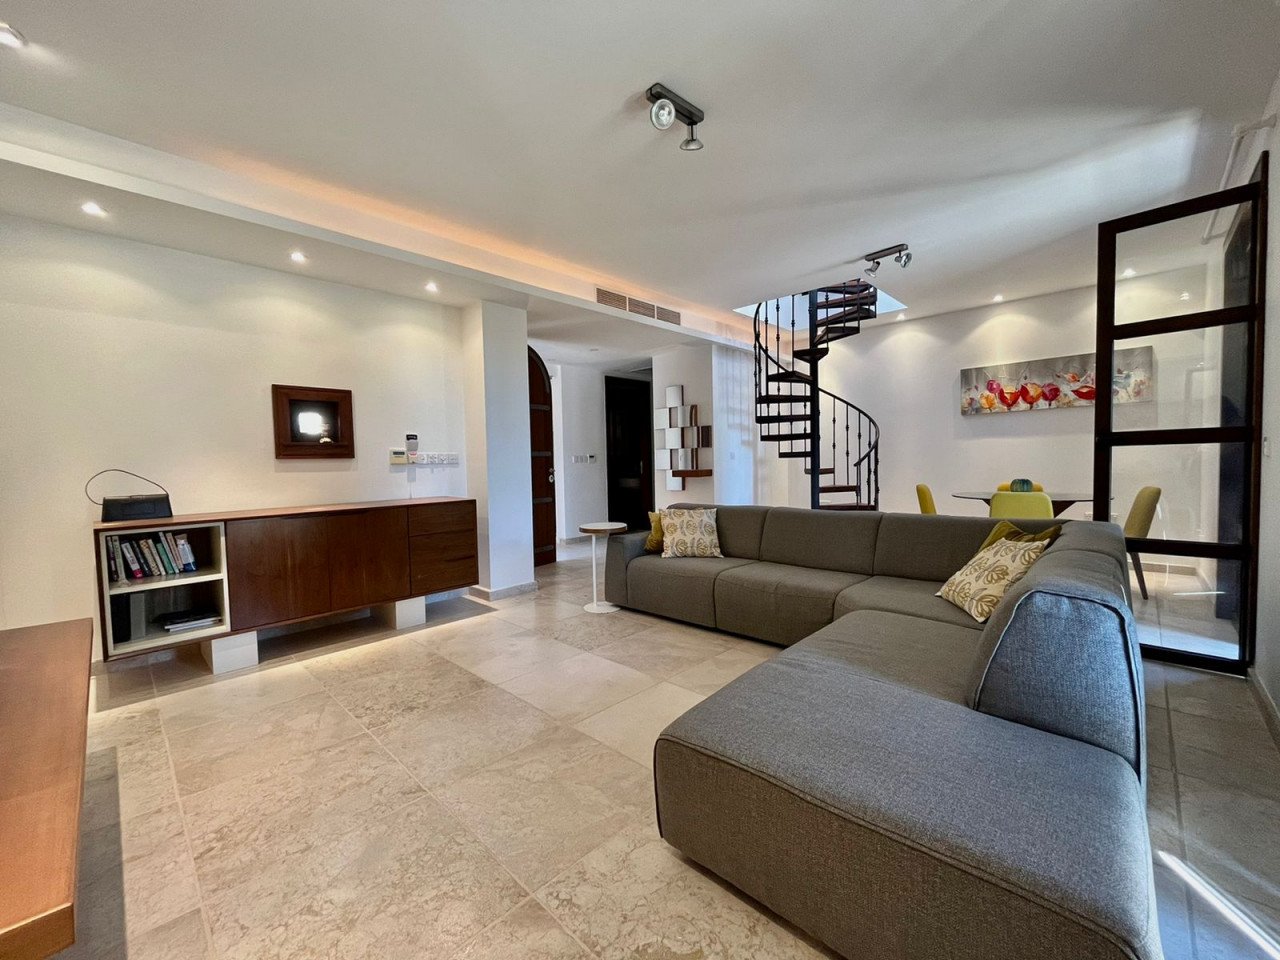 Property for Sale: Apartment (Flat) in Park Lane Area, Limassol  | Key Realtor Cyprus